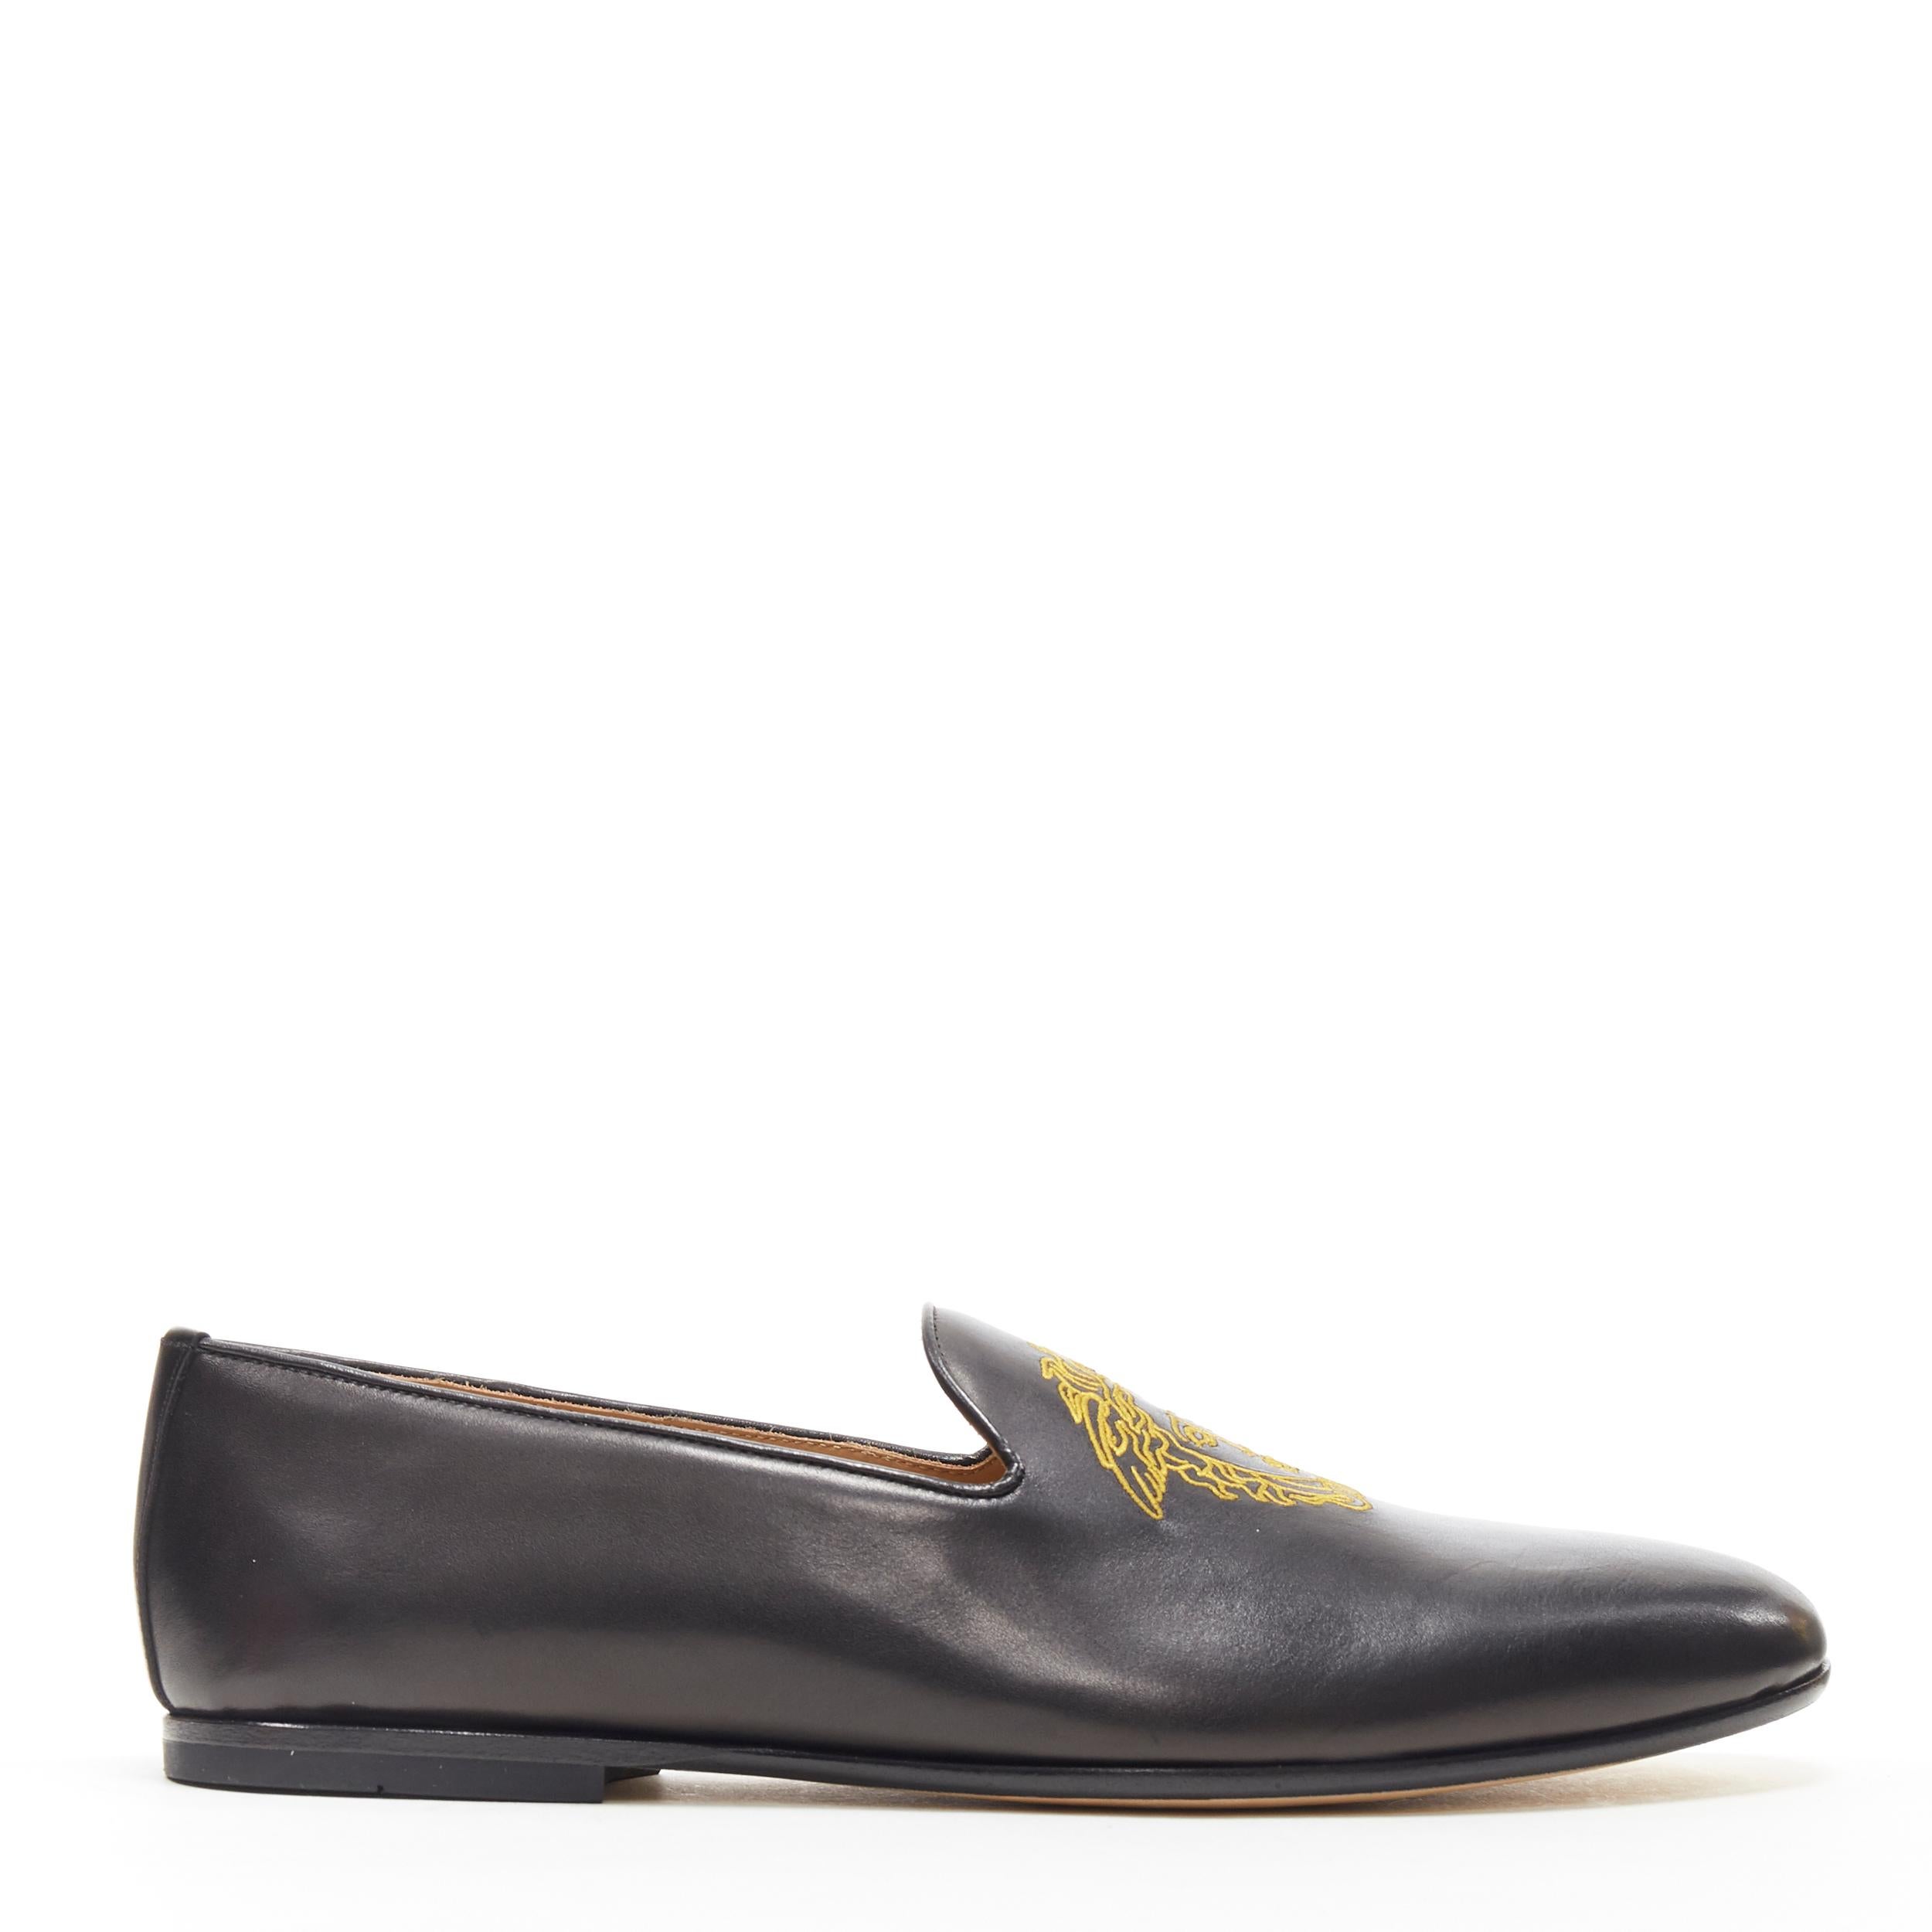 new VERSACE black leather gold Medusa embroidery le smoking slipper loafer EU43
Brand: Versace
Designer: Donatella Versace
Model Name / Style: Leather loafer
Material: Leather
Color: Black
Pattern: Solid
Closure: Slip on
Extra Detail: Calf leather